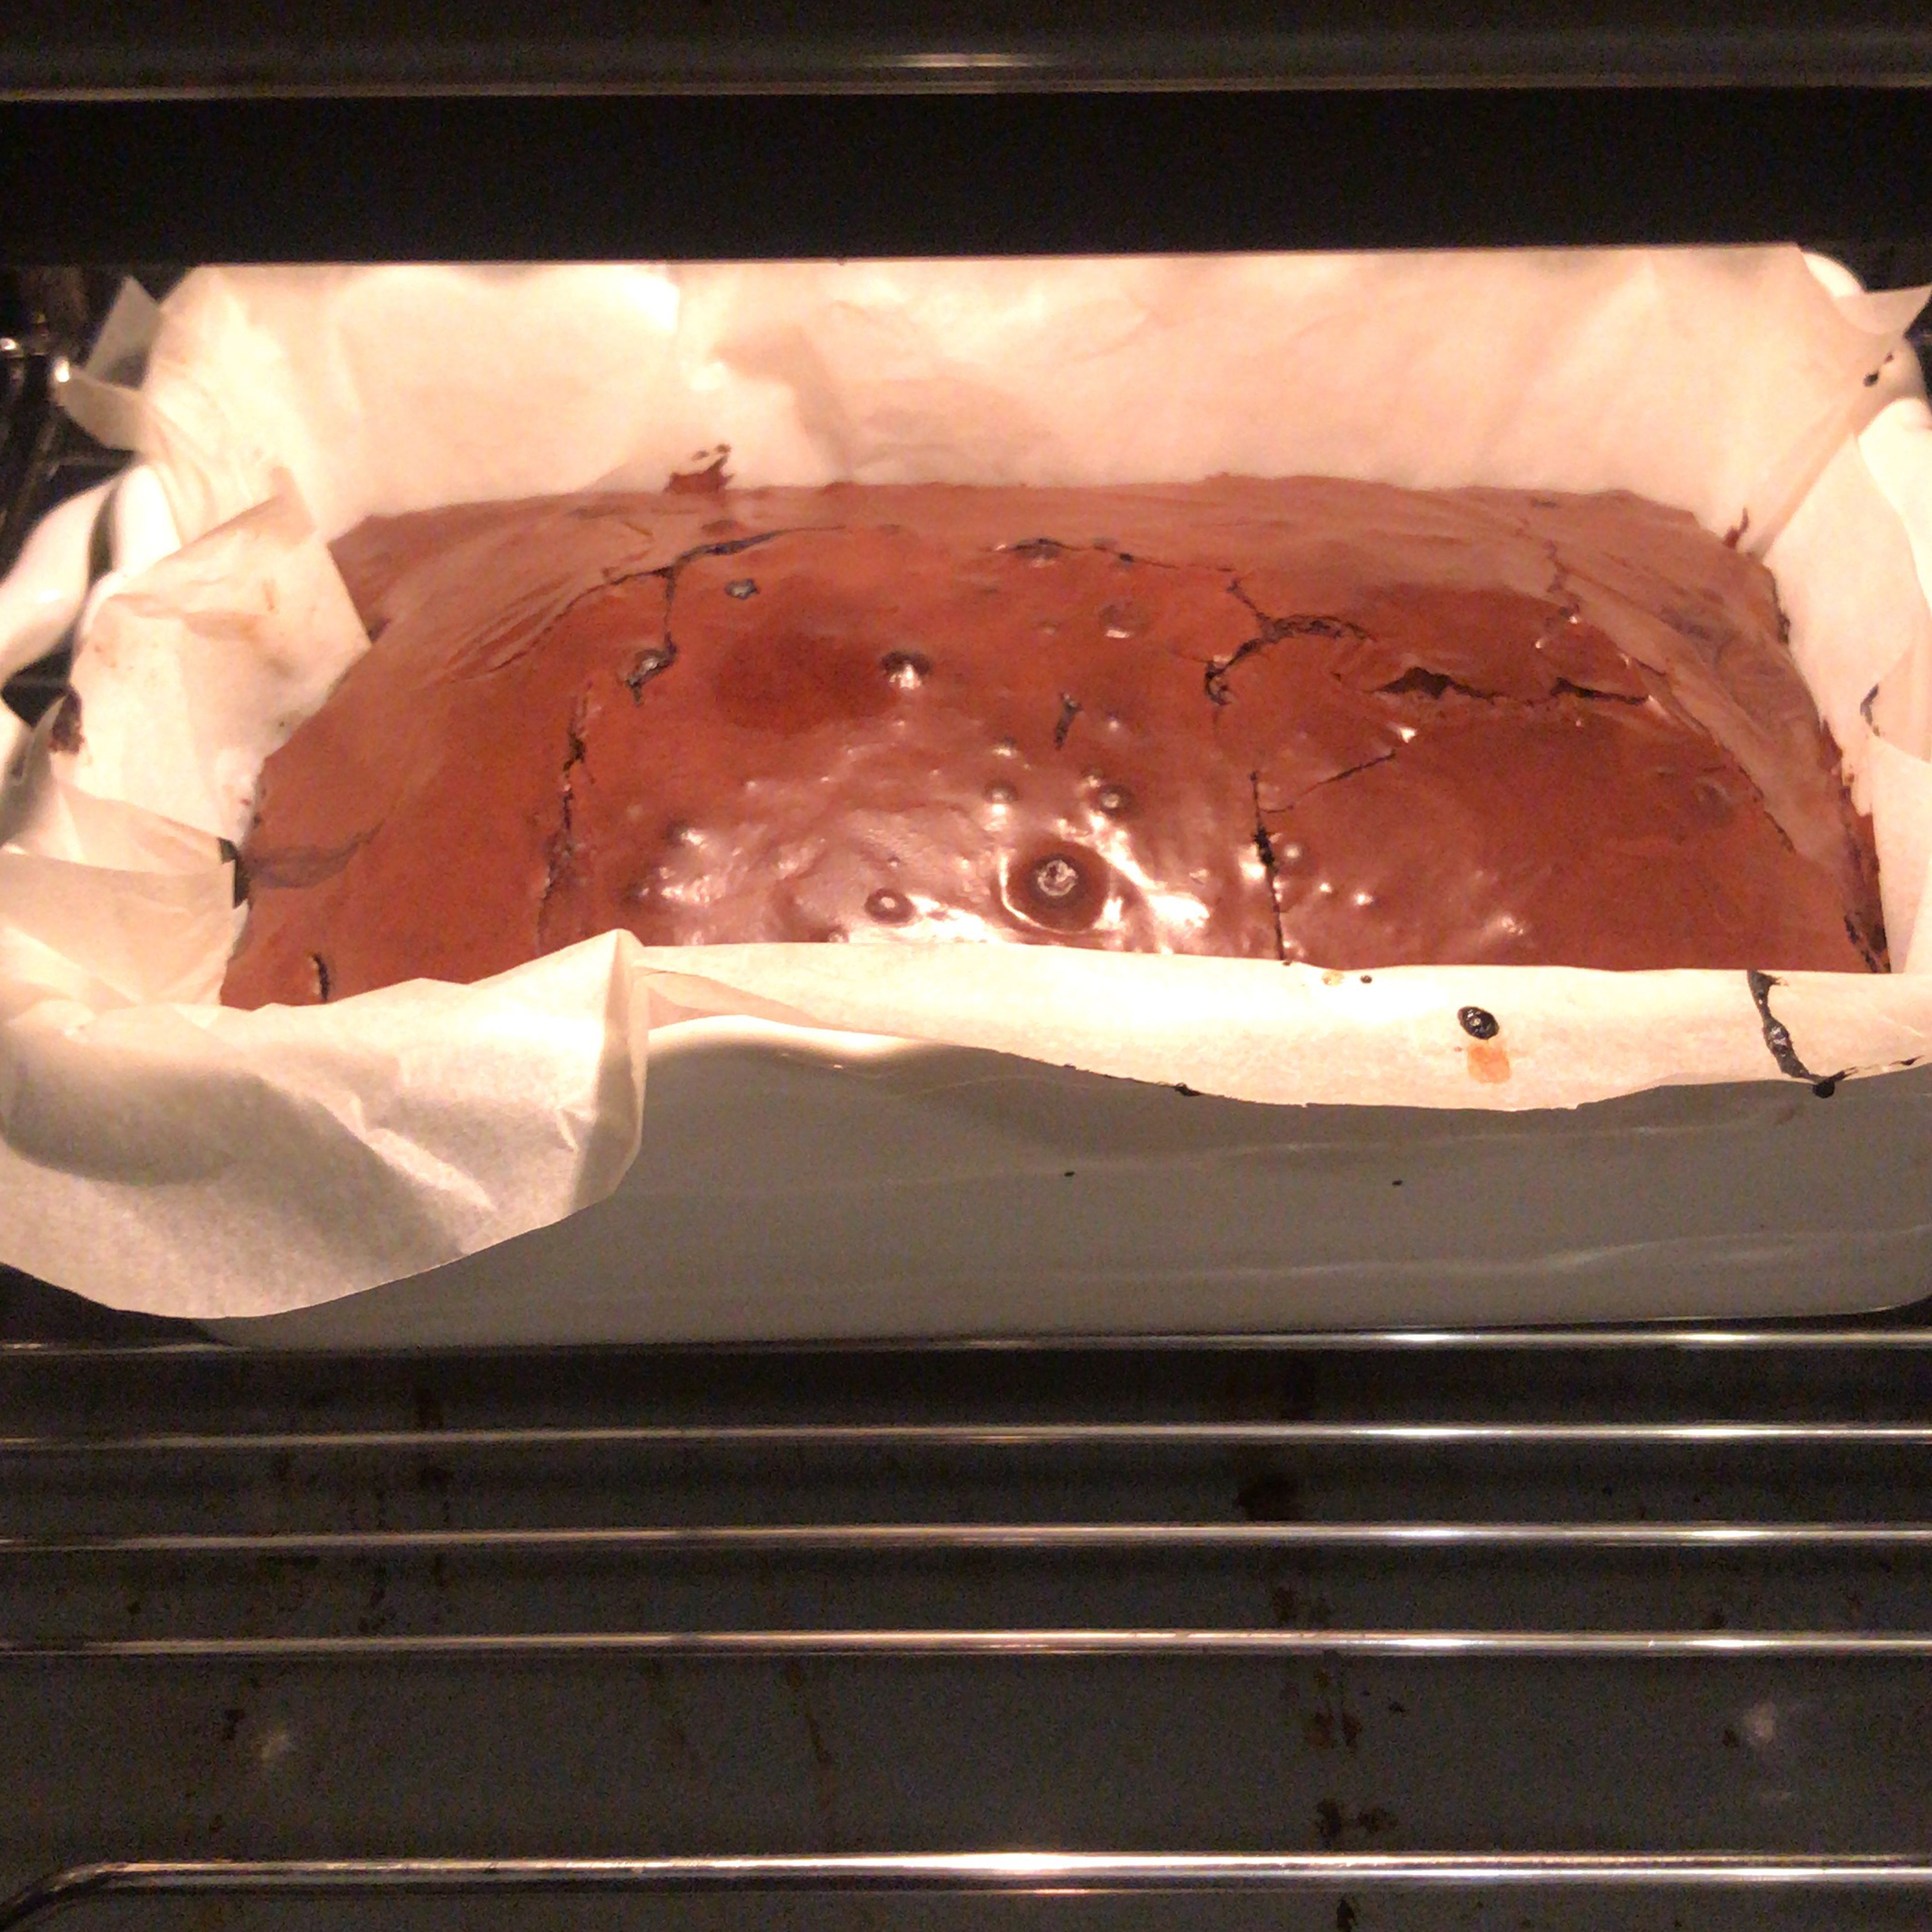 After cherries, other half of the chocolate mixture can put over the cherries. And the cake is ready to bake in 180c 1 hour